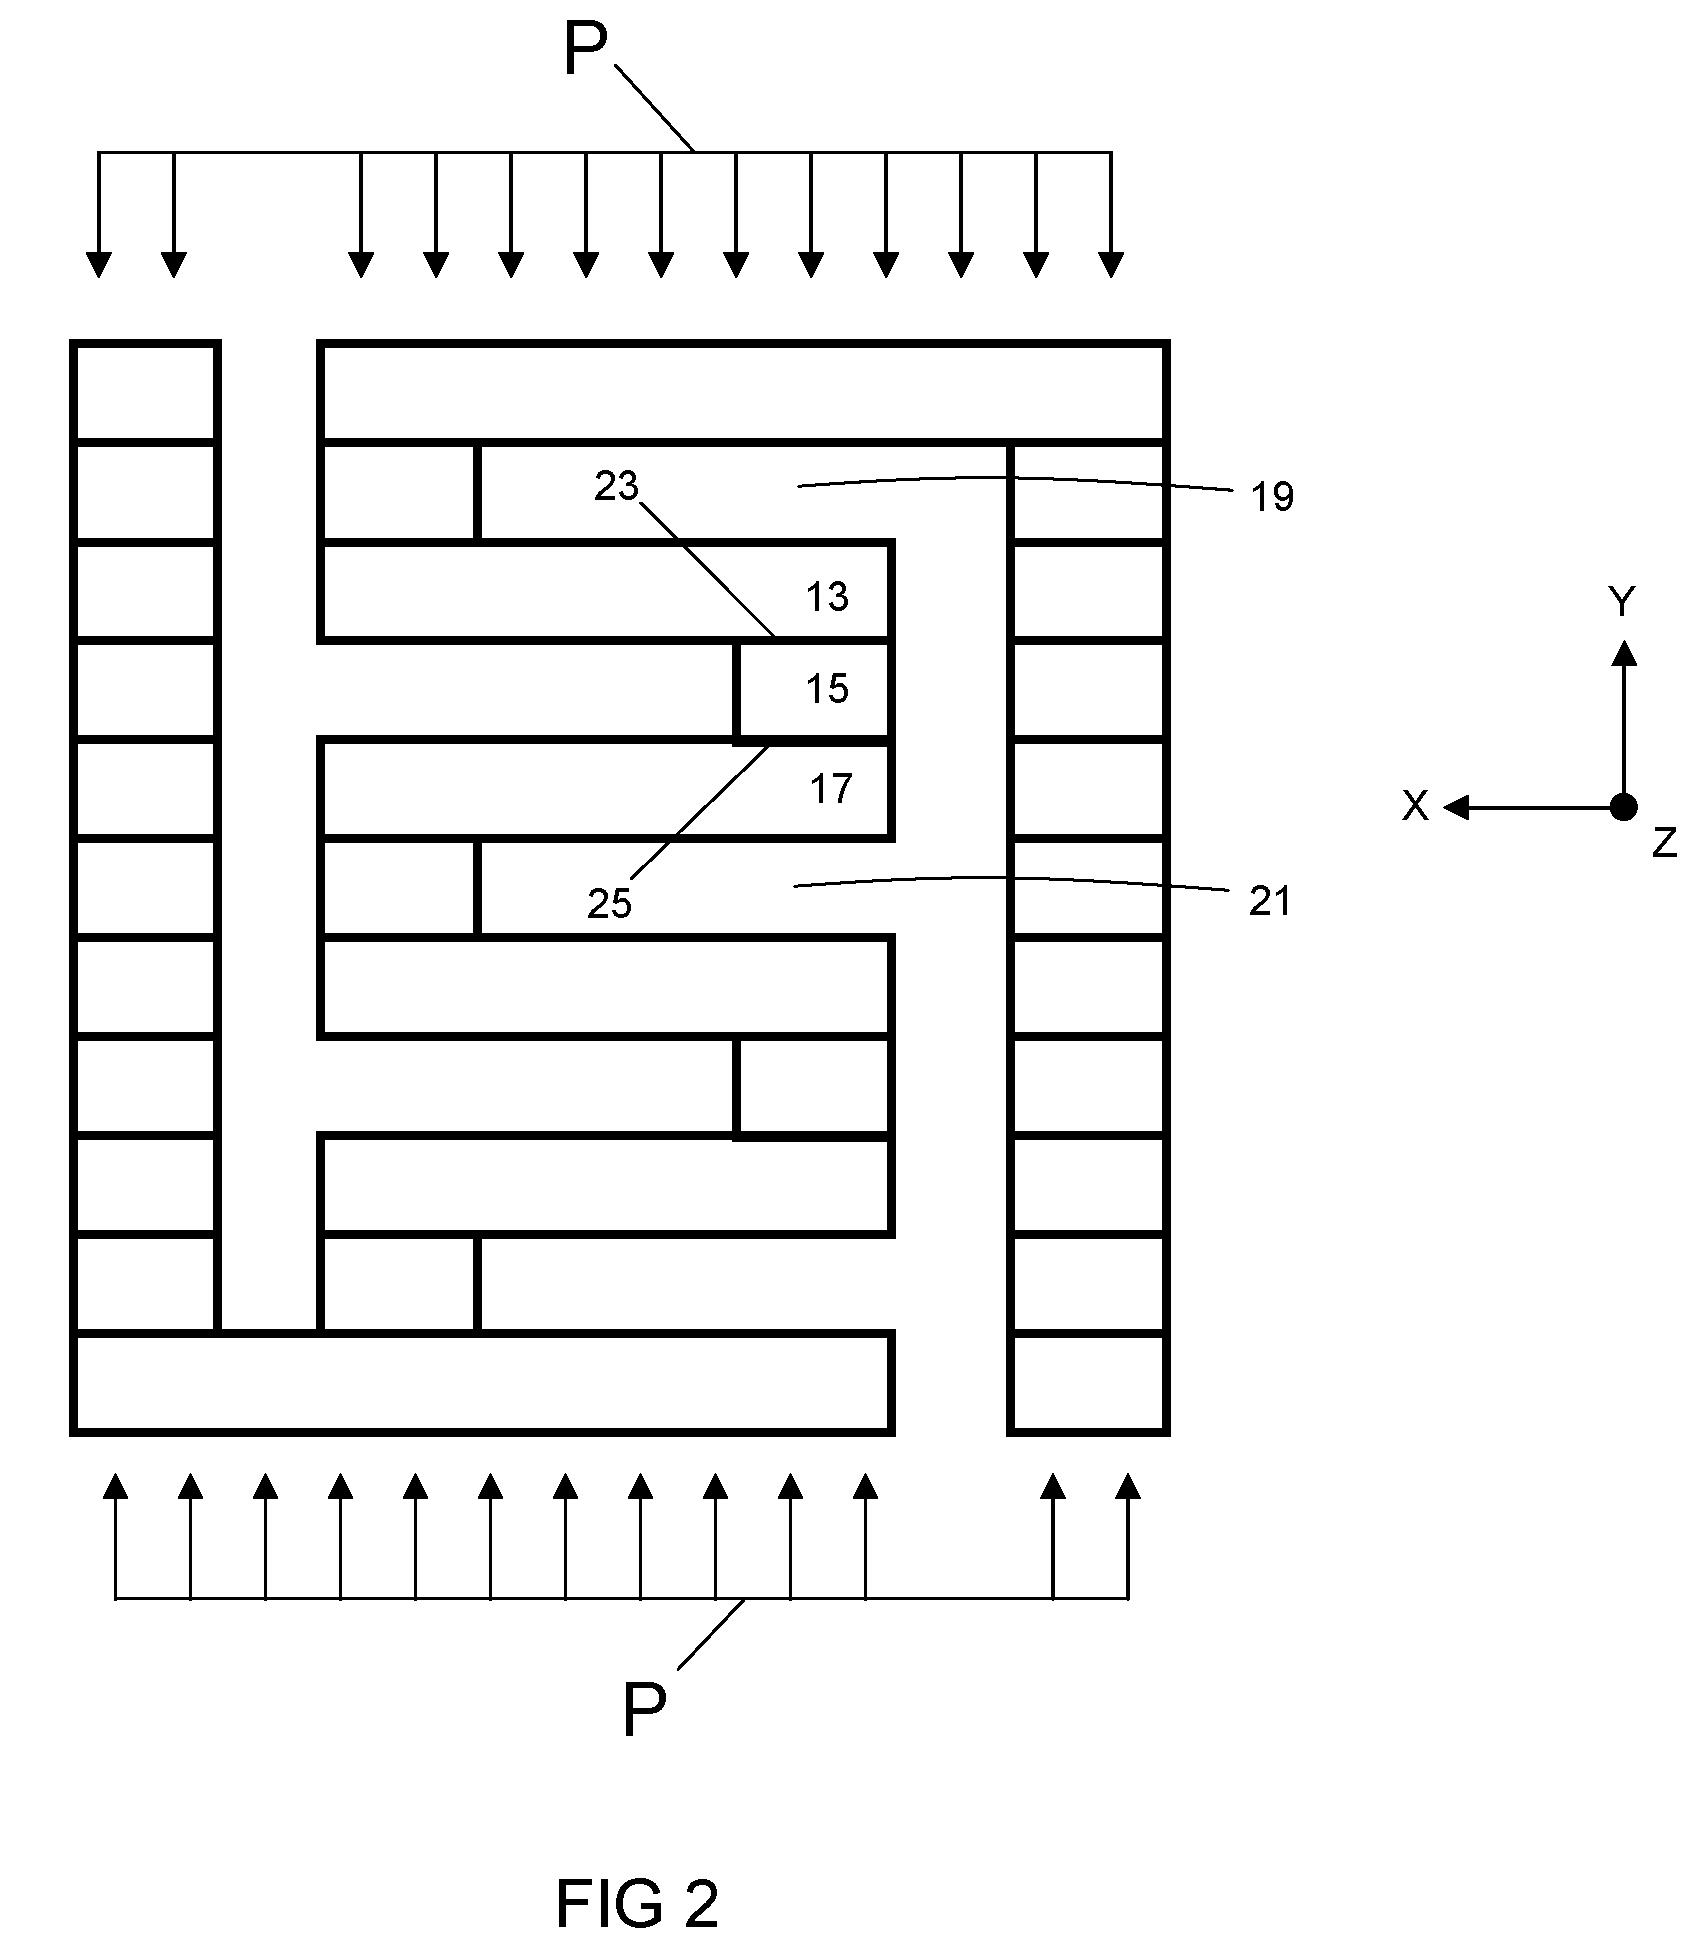 Method for producing components with internal architectures, such as micro-channel reactors, via diffusion bonding sheets